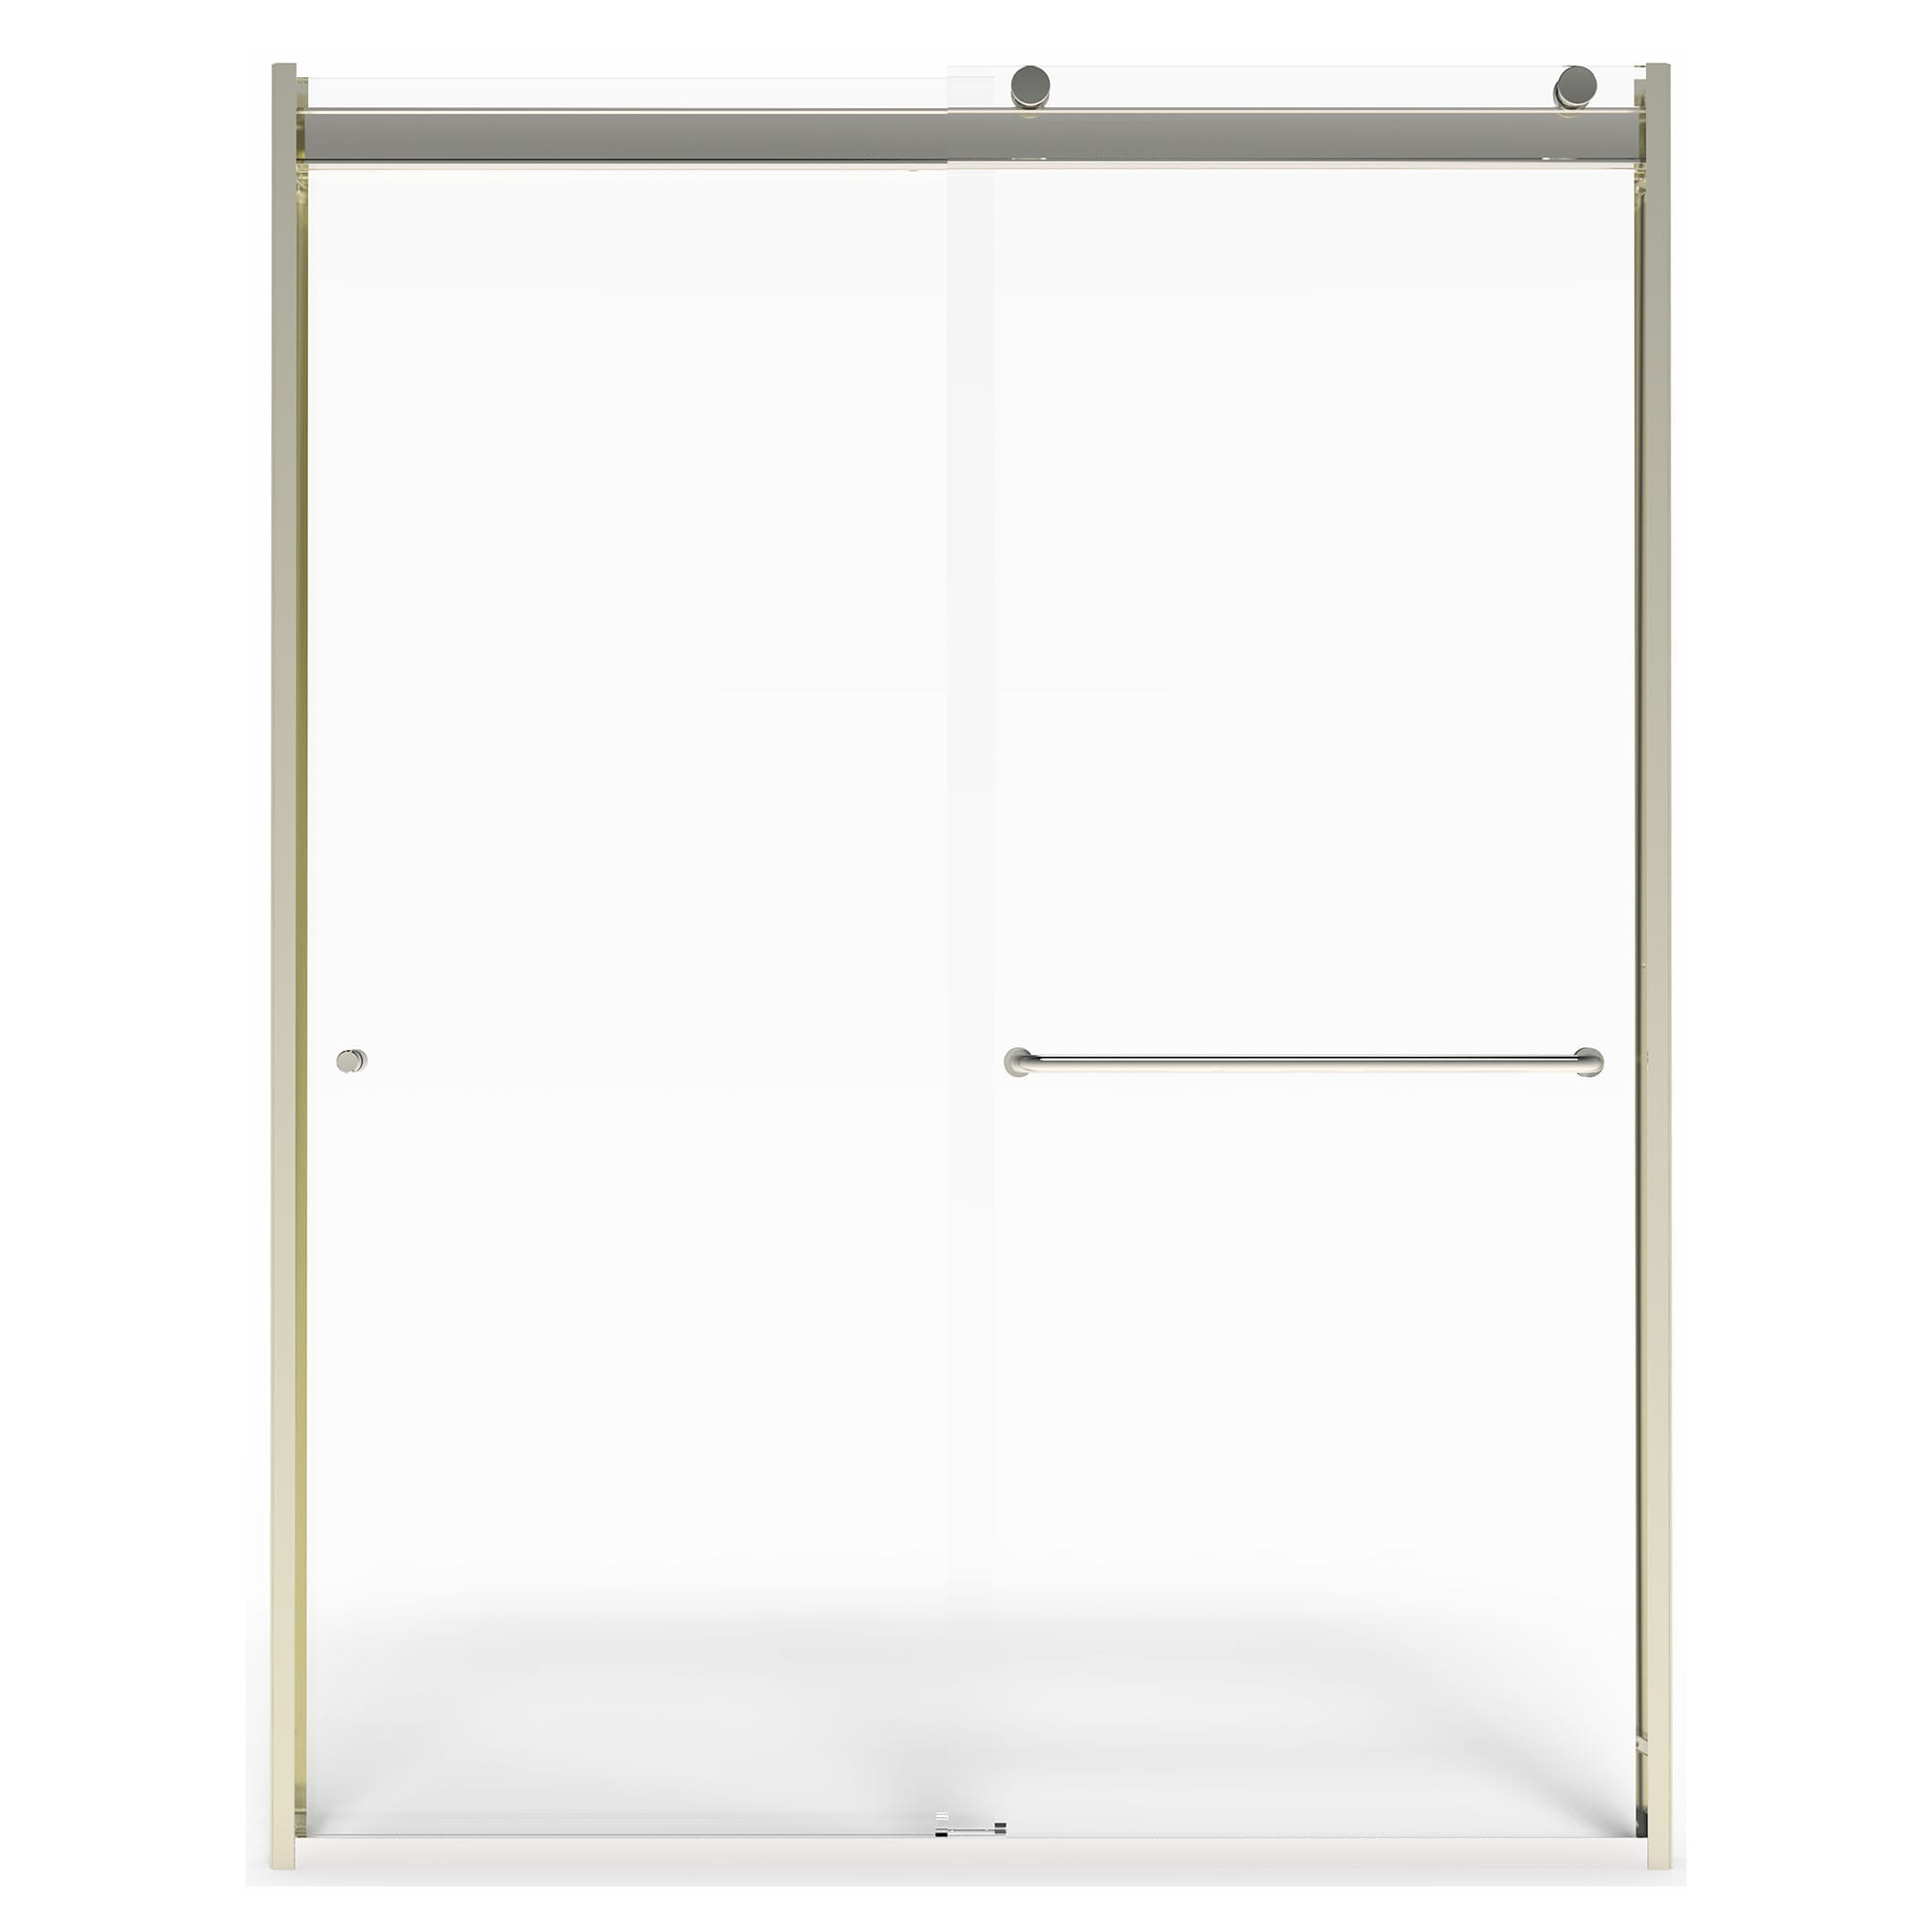 Brushed Nickel 44-in to 48-in x 76-in Semi-frameless Sliding Soft Close Shower Door | - American Standard AM00810400.006